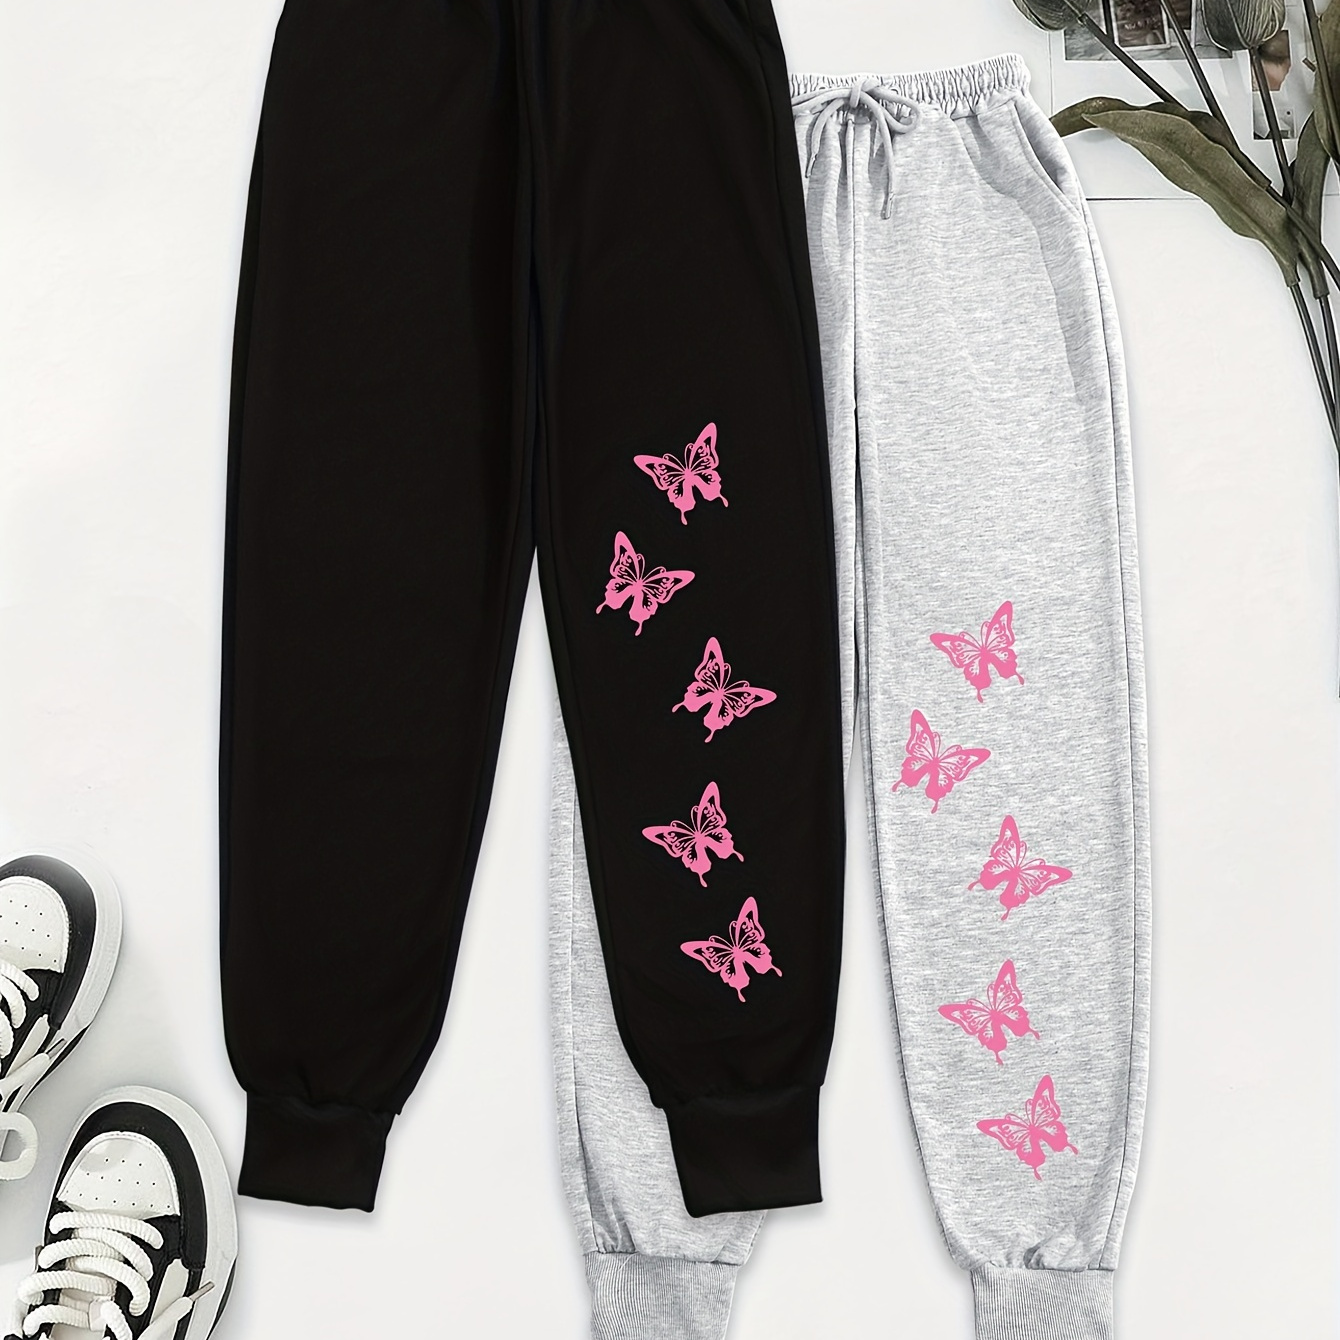 

Butterfly Print Jogger Sweatpants 2 Pack, Casual Drawstring Sporty Pants With Pocket, Women's Clothing